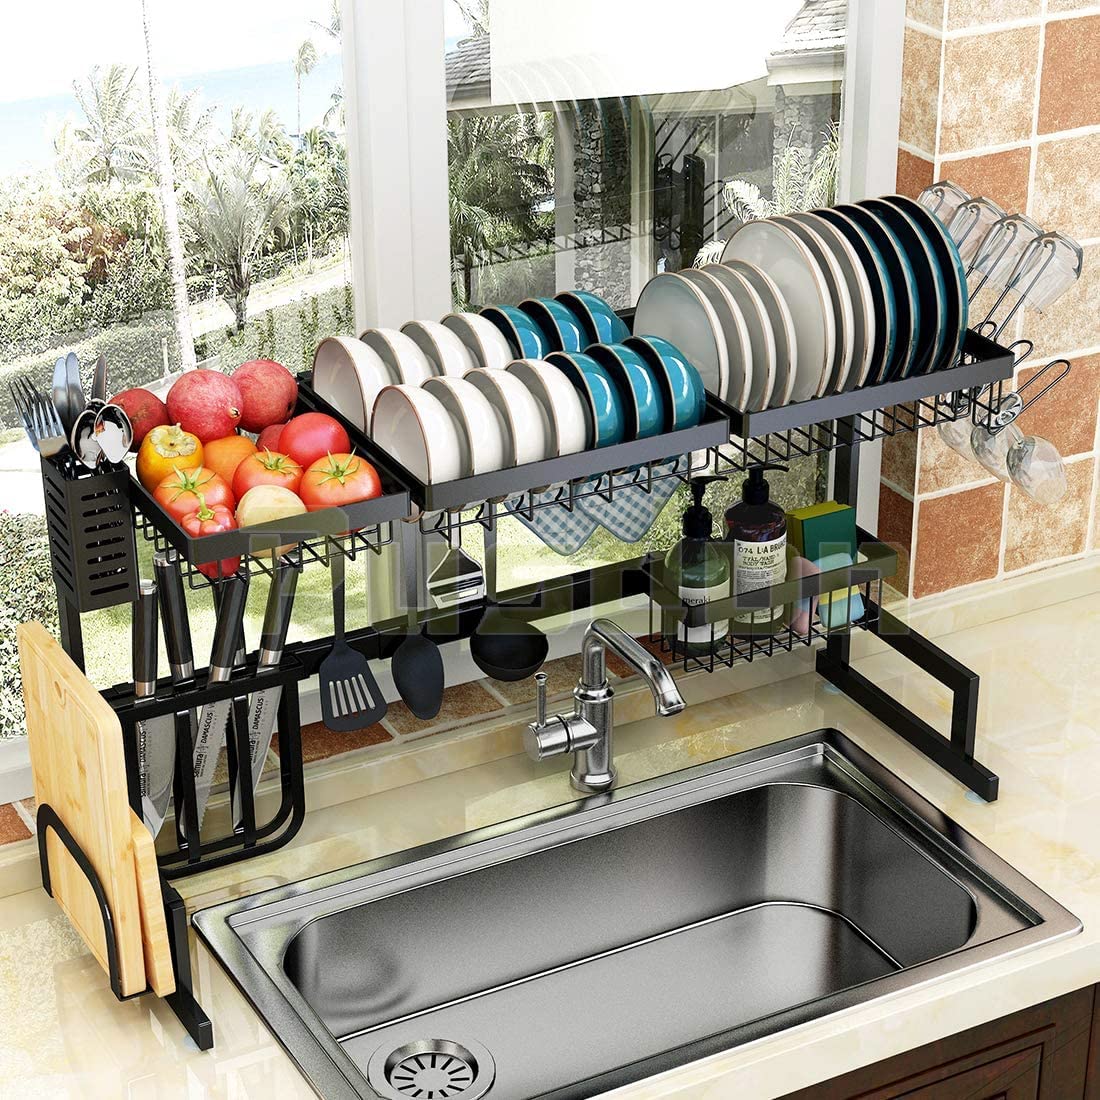 Re-Kitch.™ Premium All-In-One Over The Sink Kitchen Rack